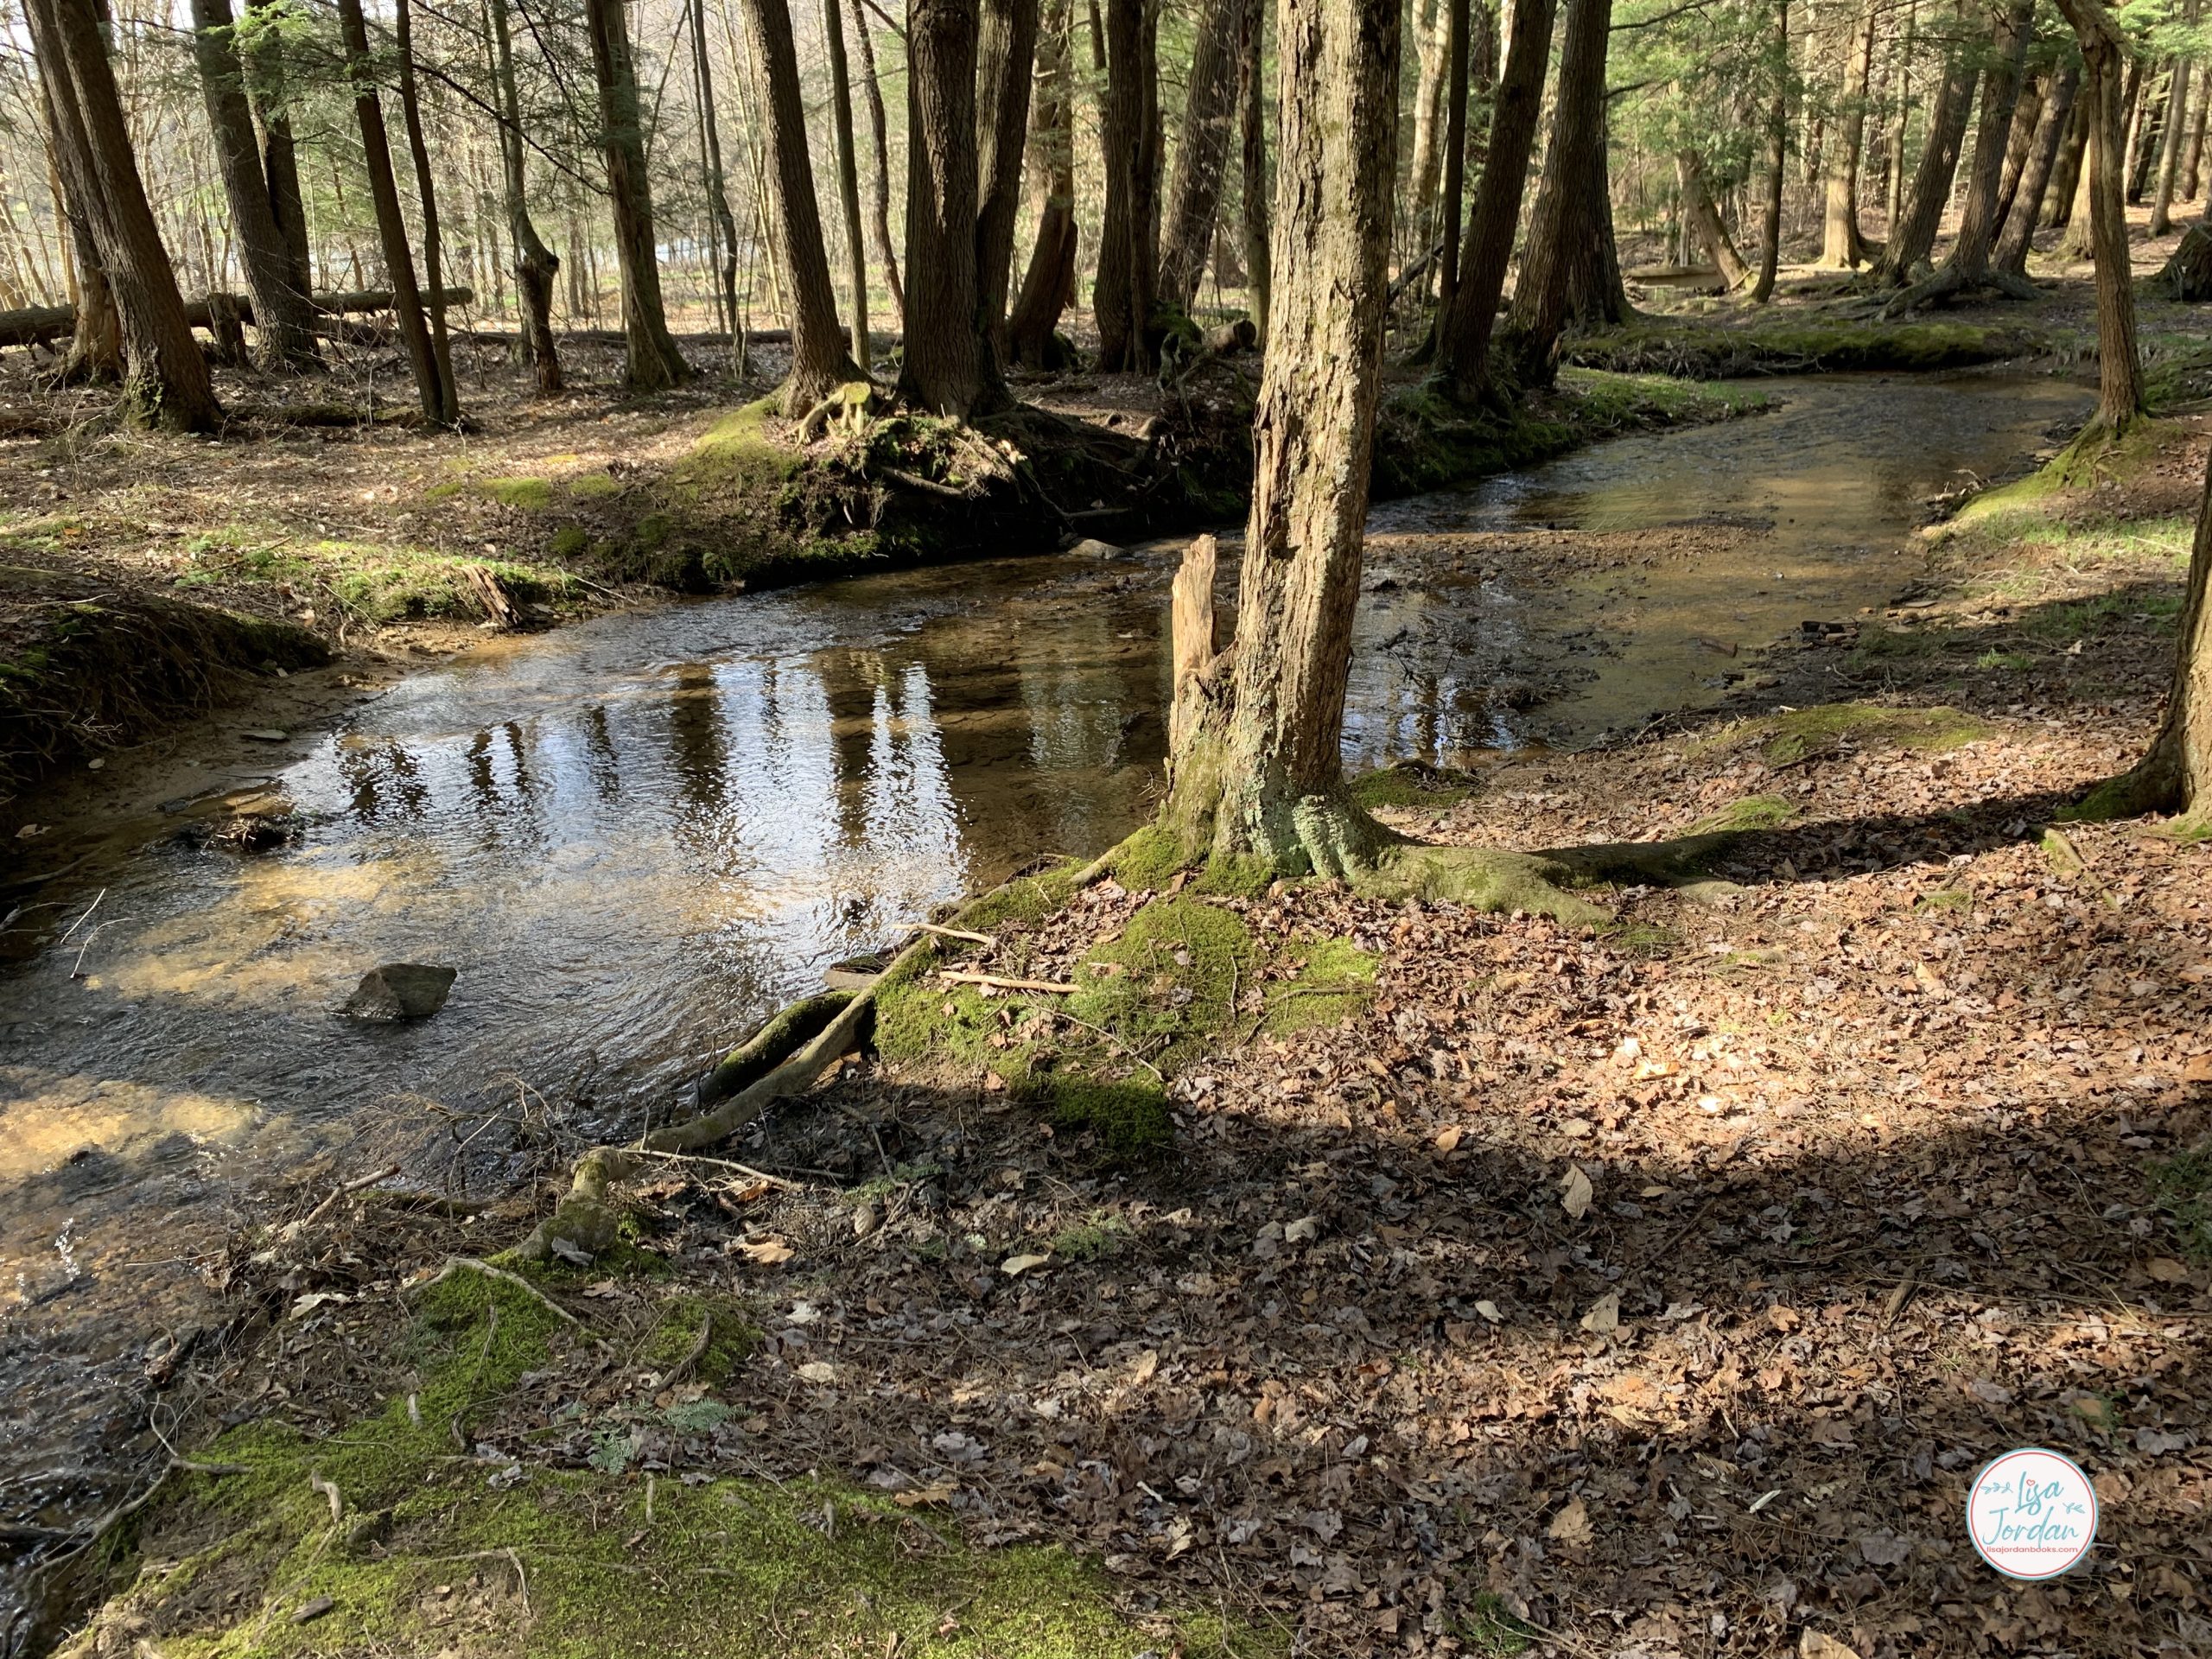 Stream through the woods in early spring